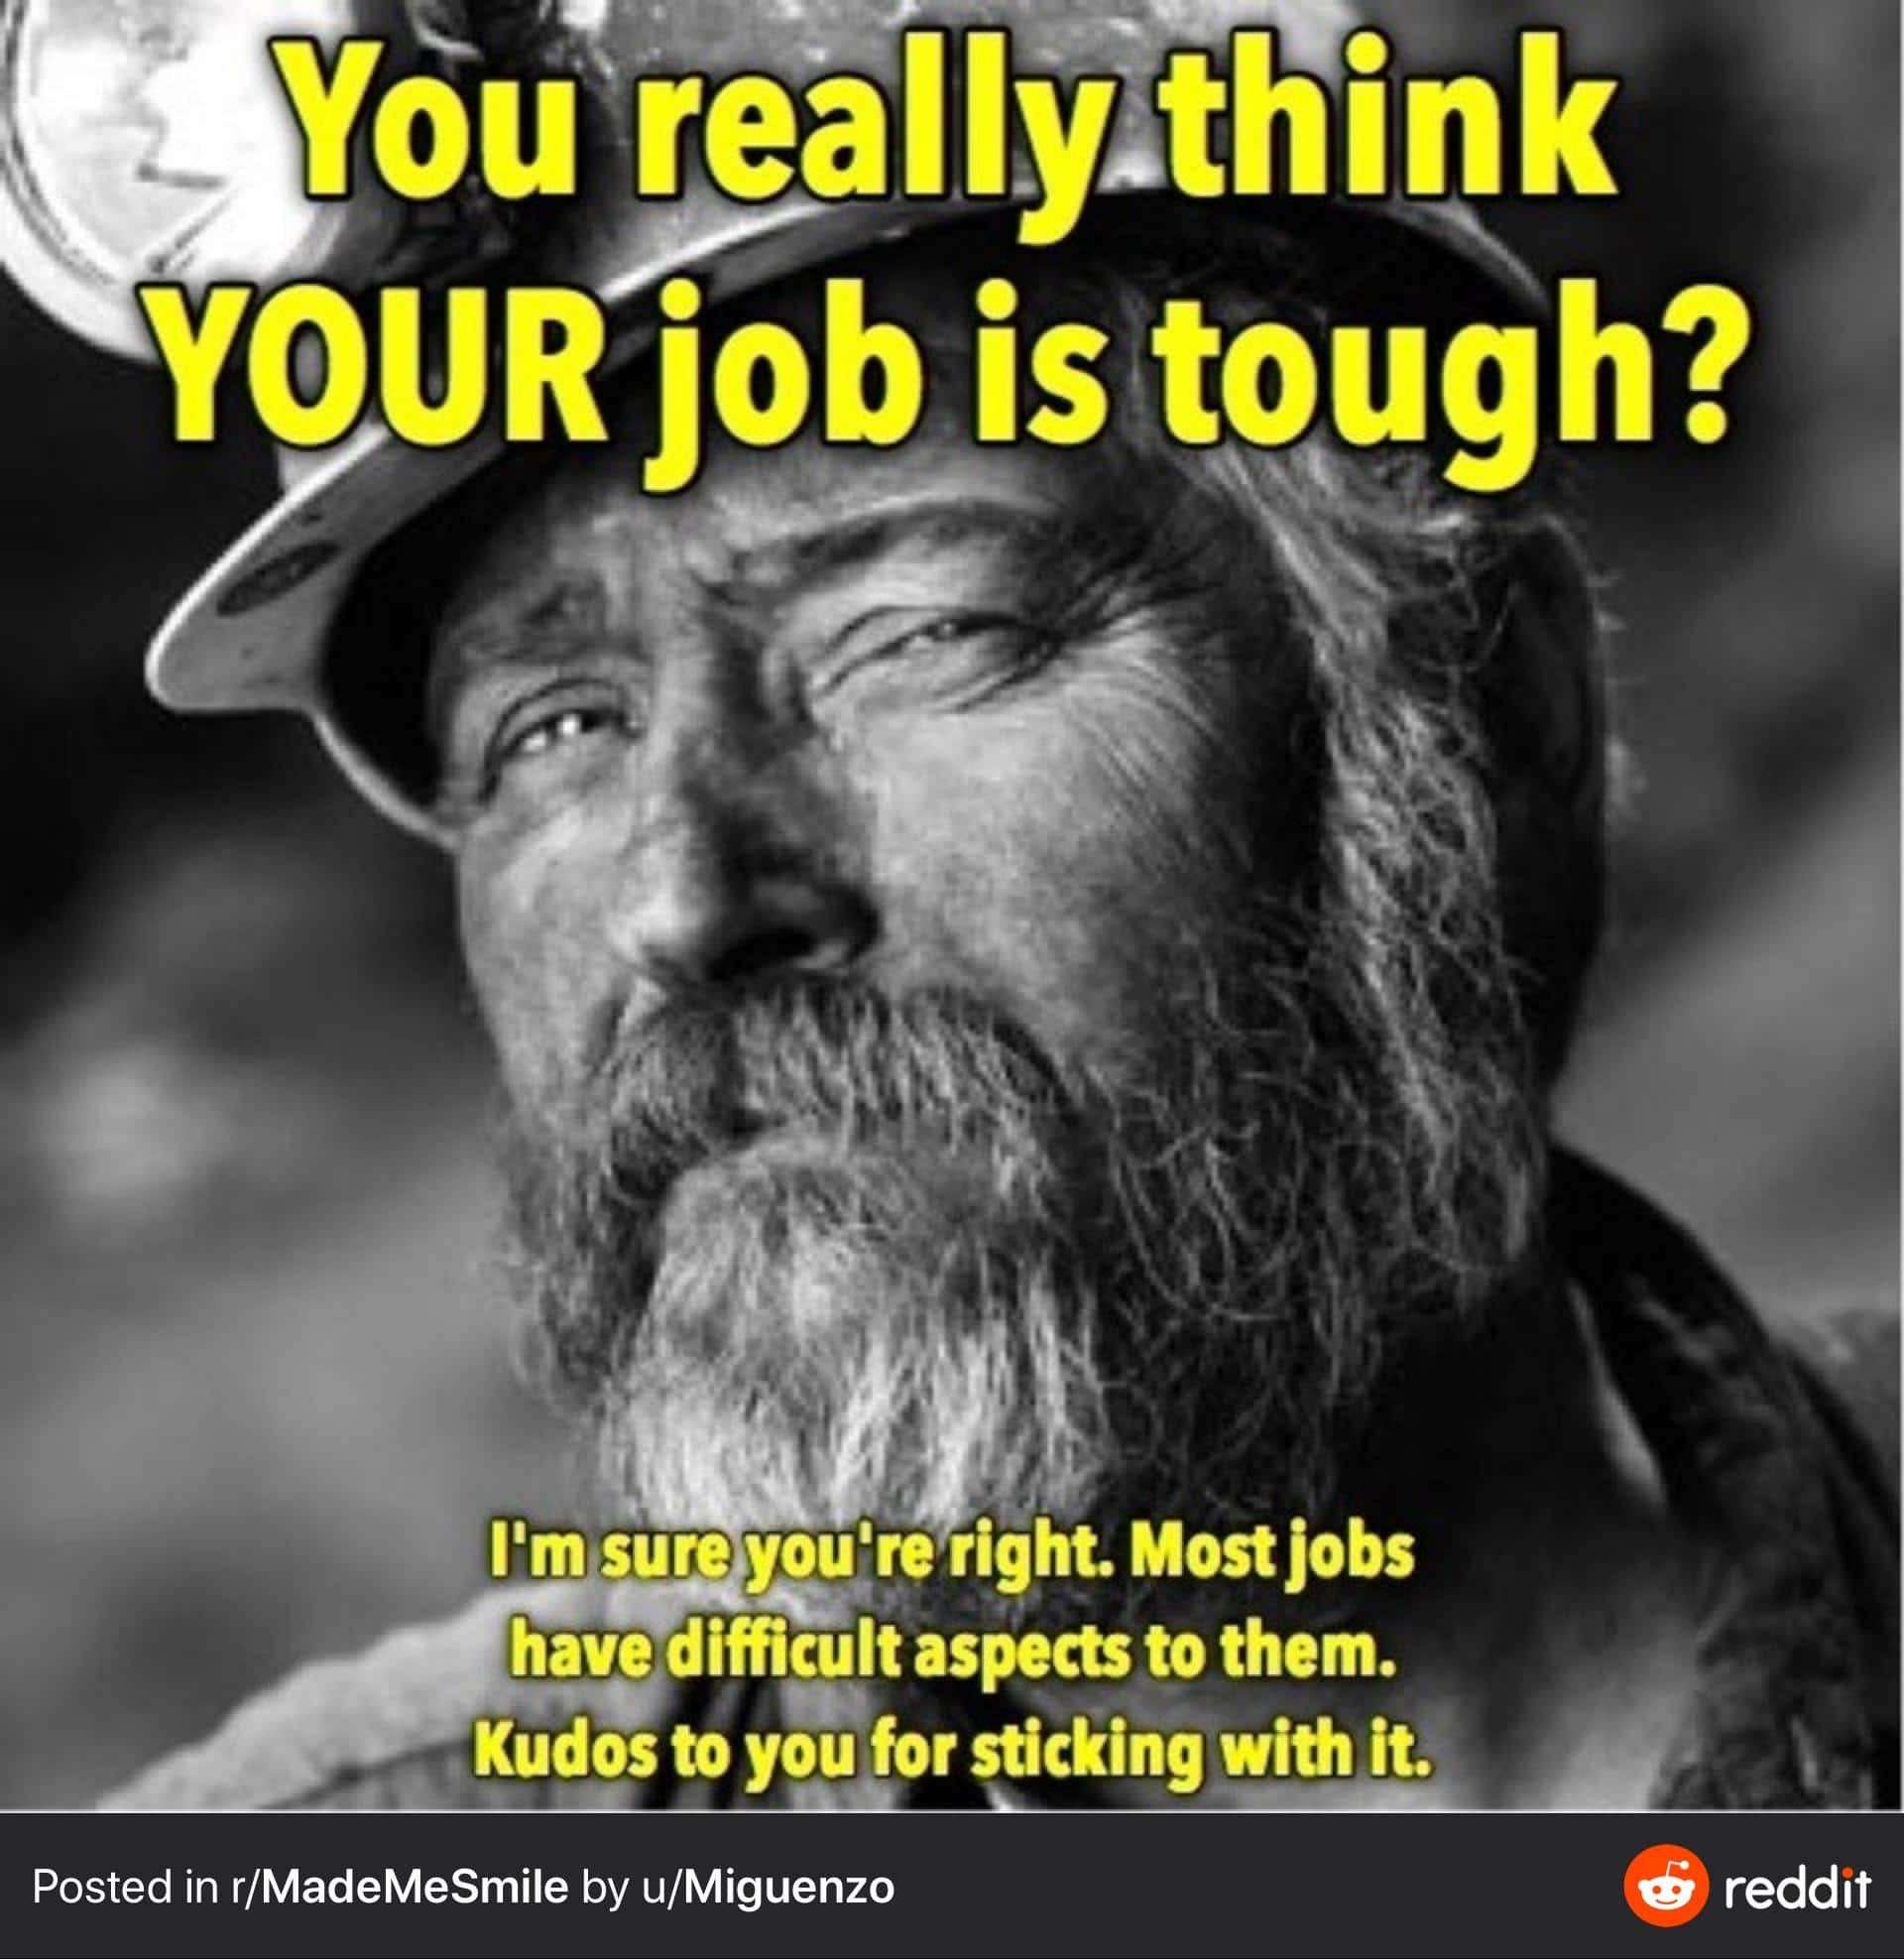 Cute, No, Dirty_Jobs, Dirty Jobs, AND Friday Wholesome Memes Cute, No, Dirty_Jobs, Dirty Jobs, AND Friday text: votir&IIyÆKink YOUR job is tough? I'm syeyoylre right. Most Jobs have difficult aspece to them. Kudos to you for sticking with it. Posted in r/MadeMeSmiIe by u/Miguenzo reddit 